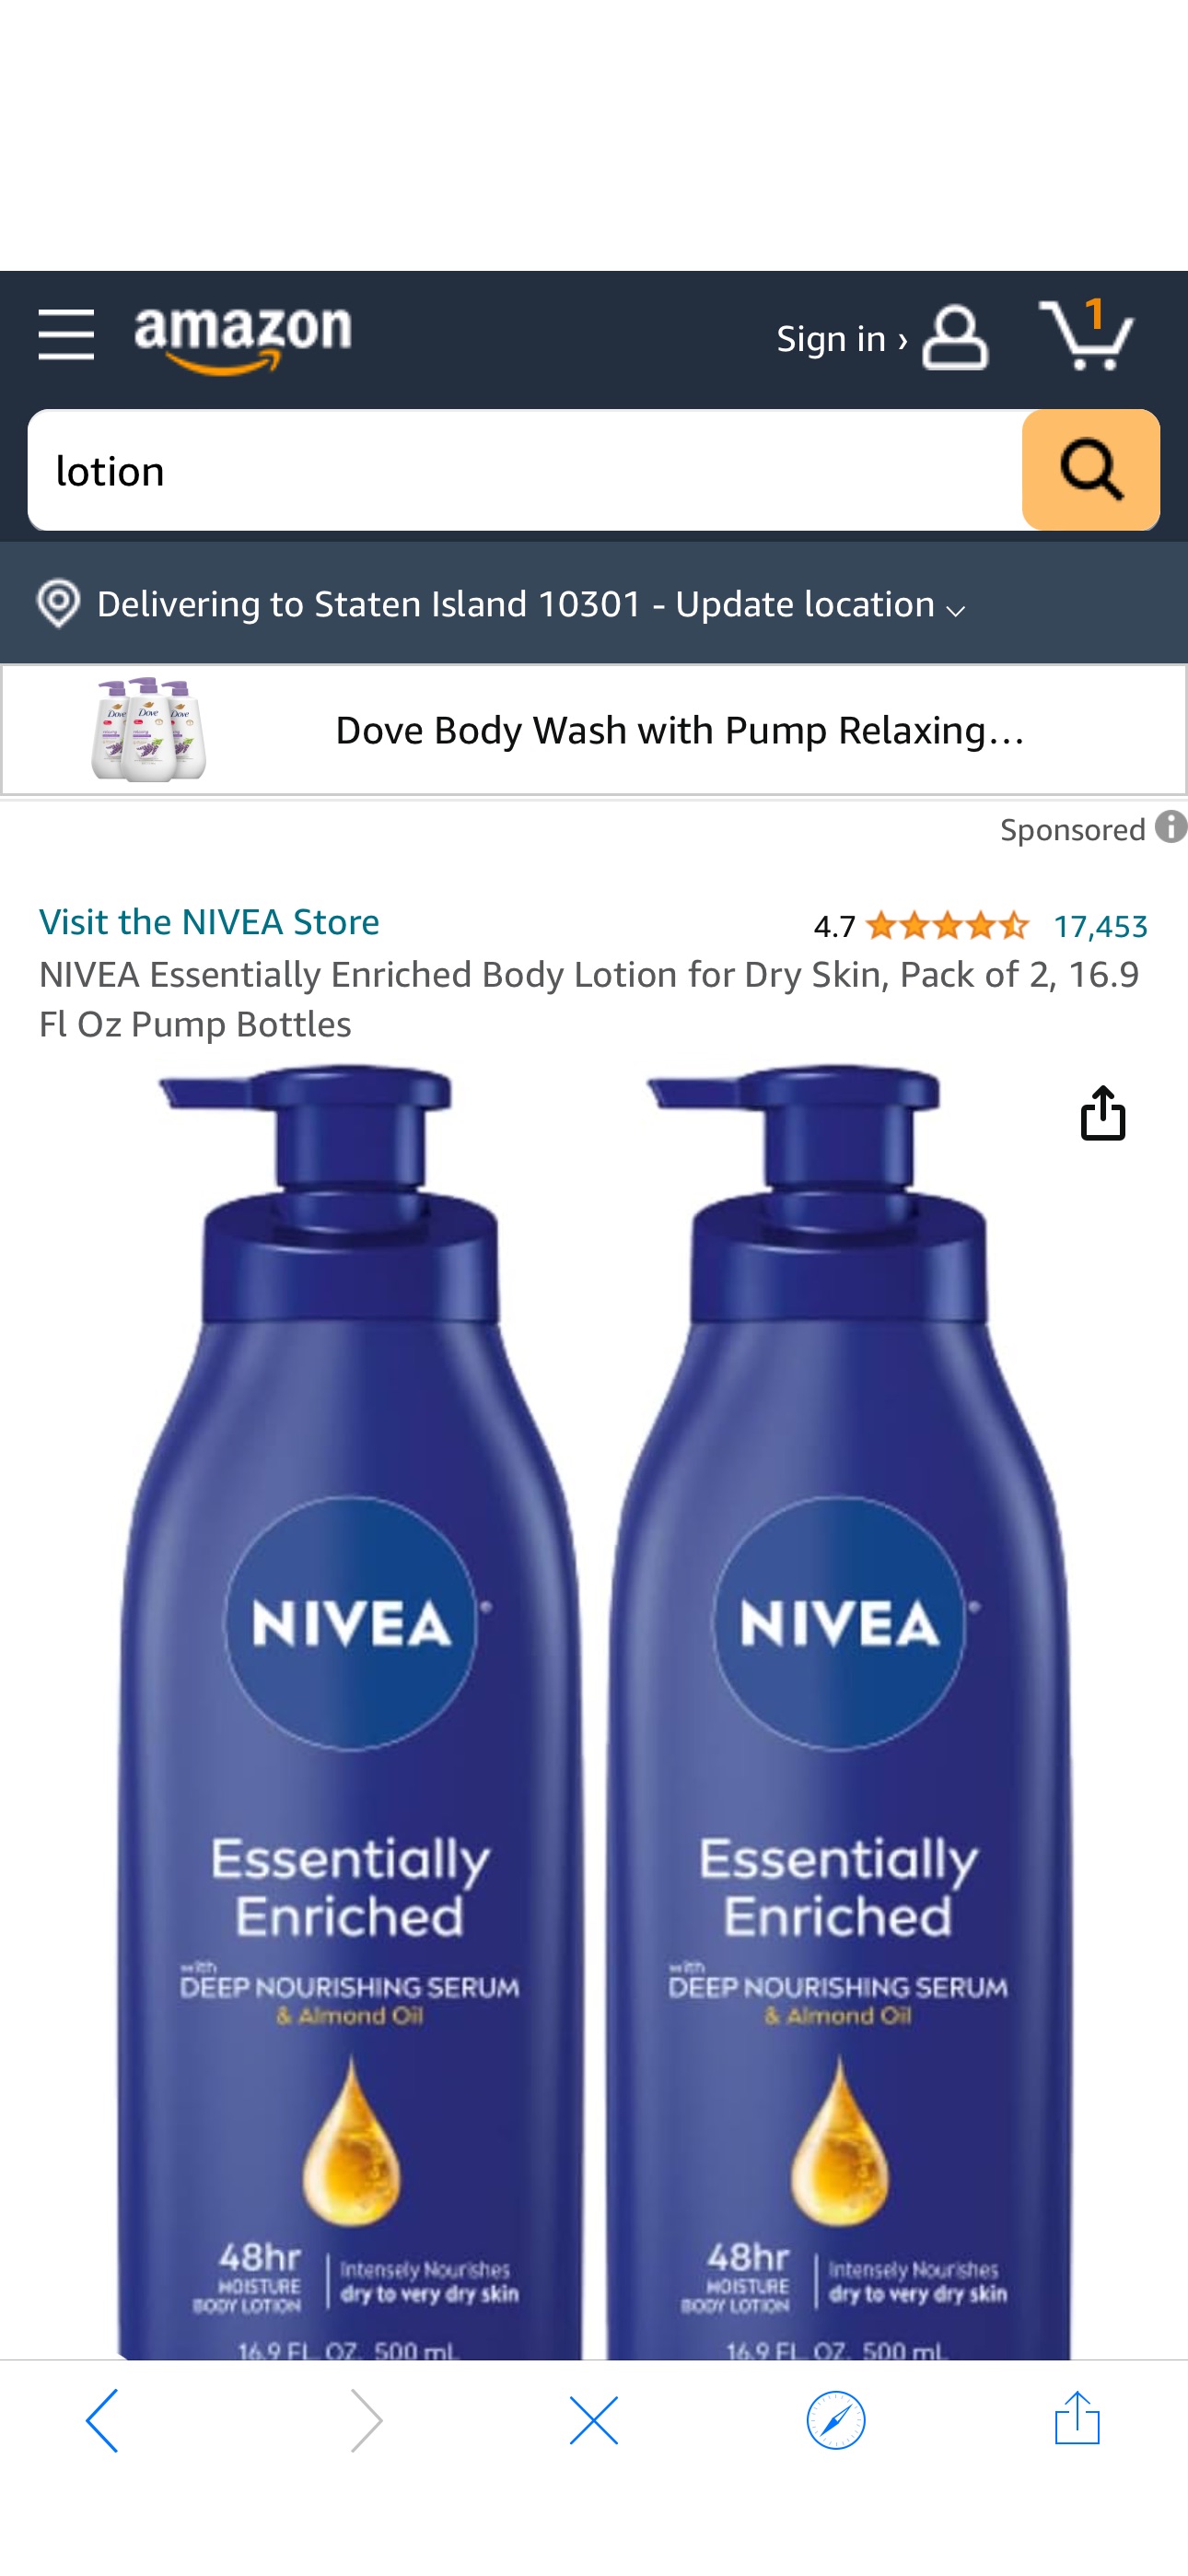 Amazon.com : NIVEA Essentially Enriched Body Lotion for Dry Skin, Pack of 2, 16.9 Fl Oz Pump Bottles : Beauty & Personal Care